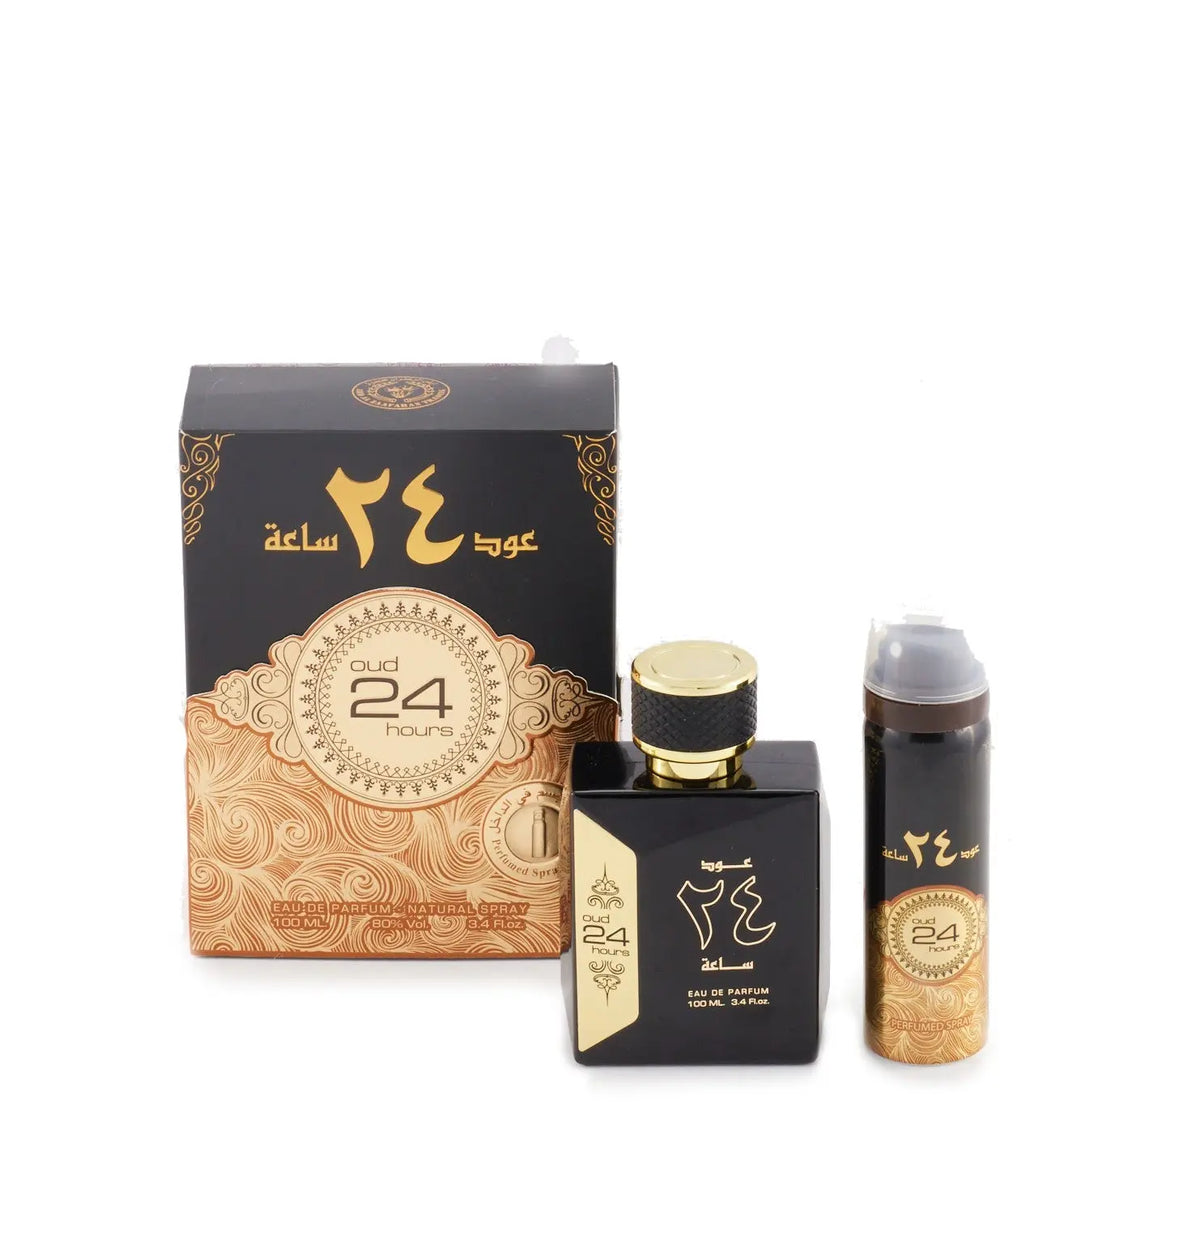 The image shows a perfume product set which includes a bottle and a canister, likely a deodorant, with the same branding. On the left, there is a boxed perfume named "Oud 24 hours" by "Ard Al Zaafaran". The box is dark with golden ornamental patterns and text, featuring a circular label design in the center. To the right, there is a black square-shaped perfume bottle with a textured golden cap and golden writing that matches the box design, along with a cylindrical black deodorant spray.